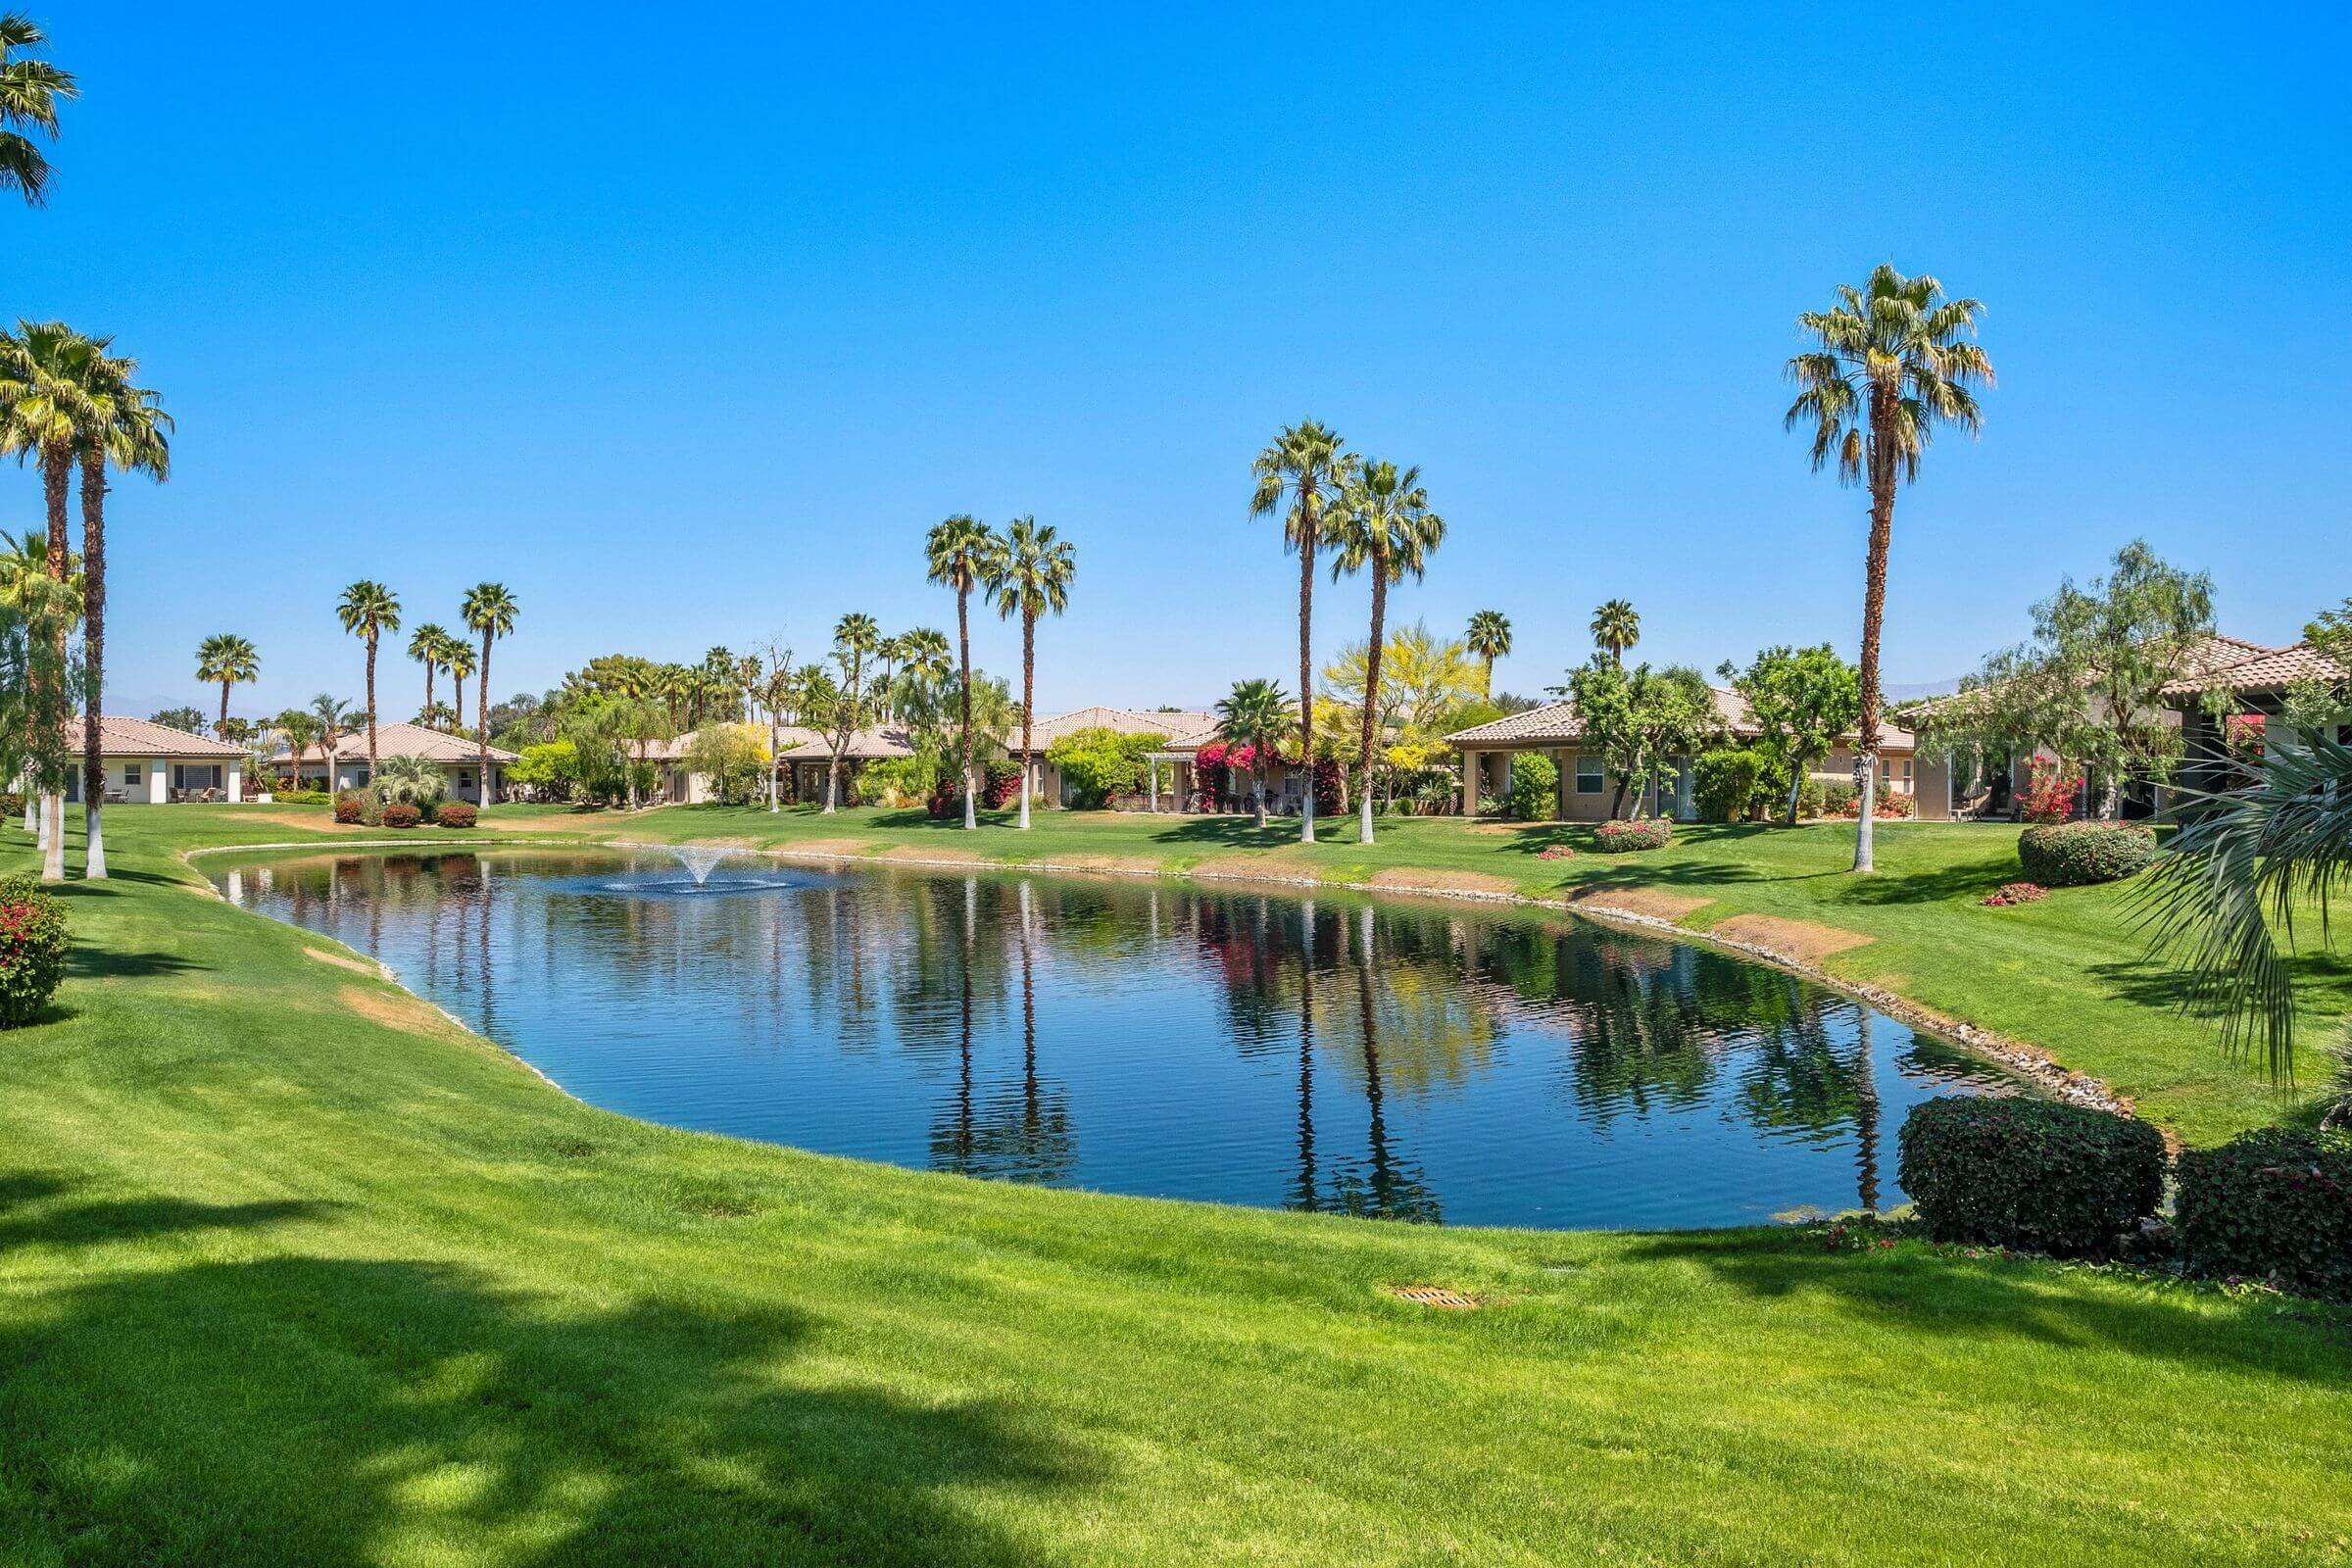 Mission Hills Lake Front Rancho Mirage 92270